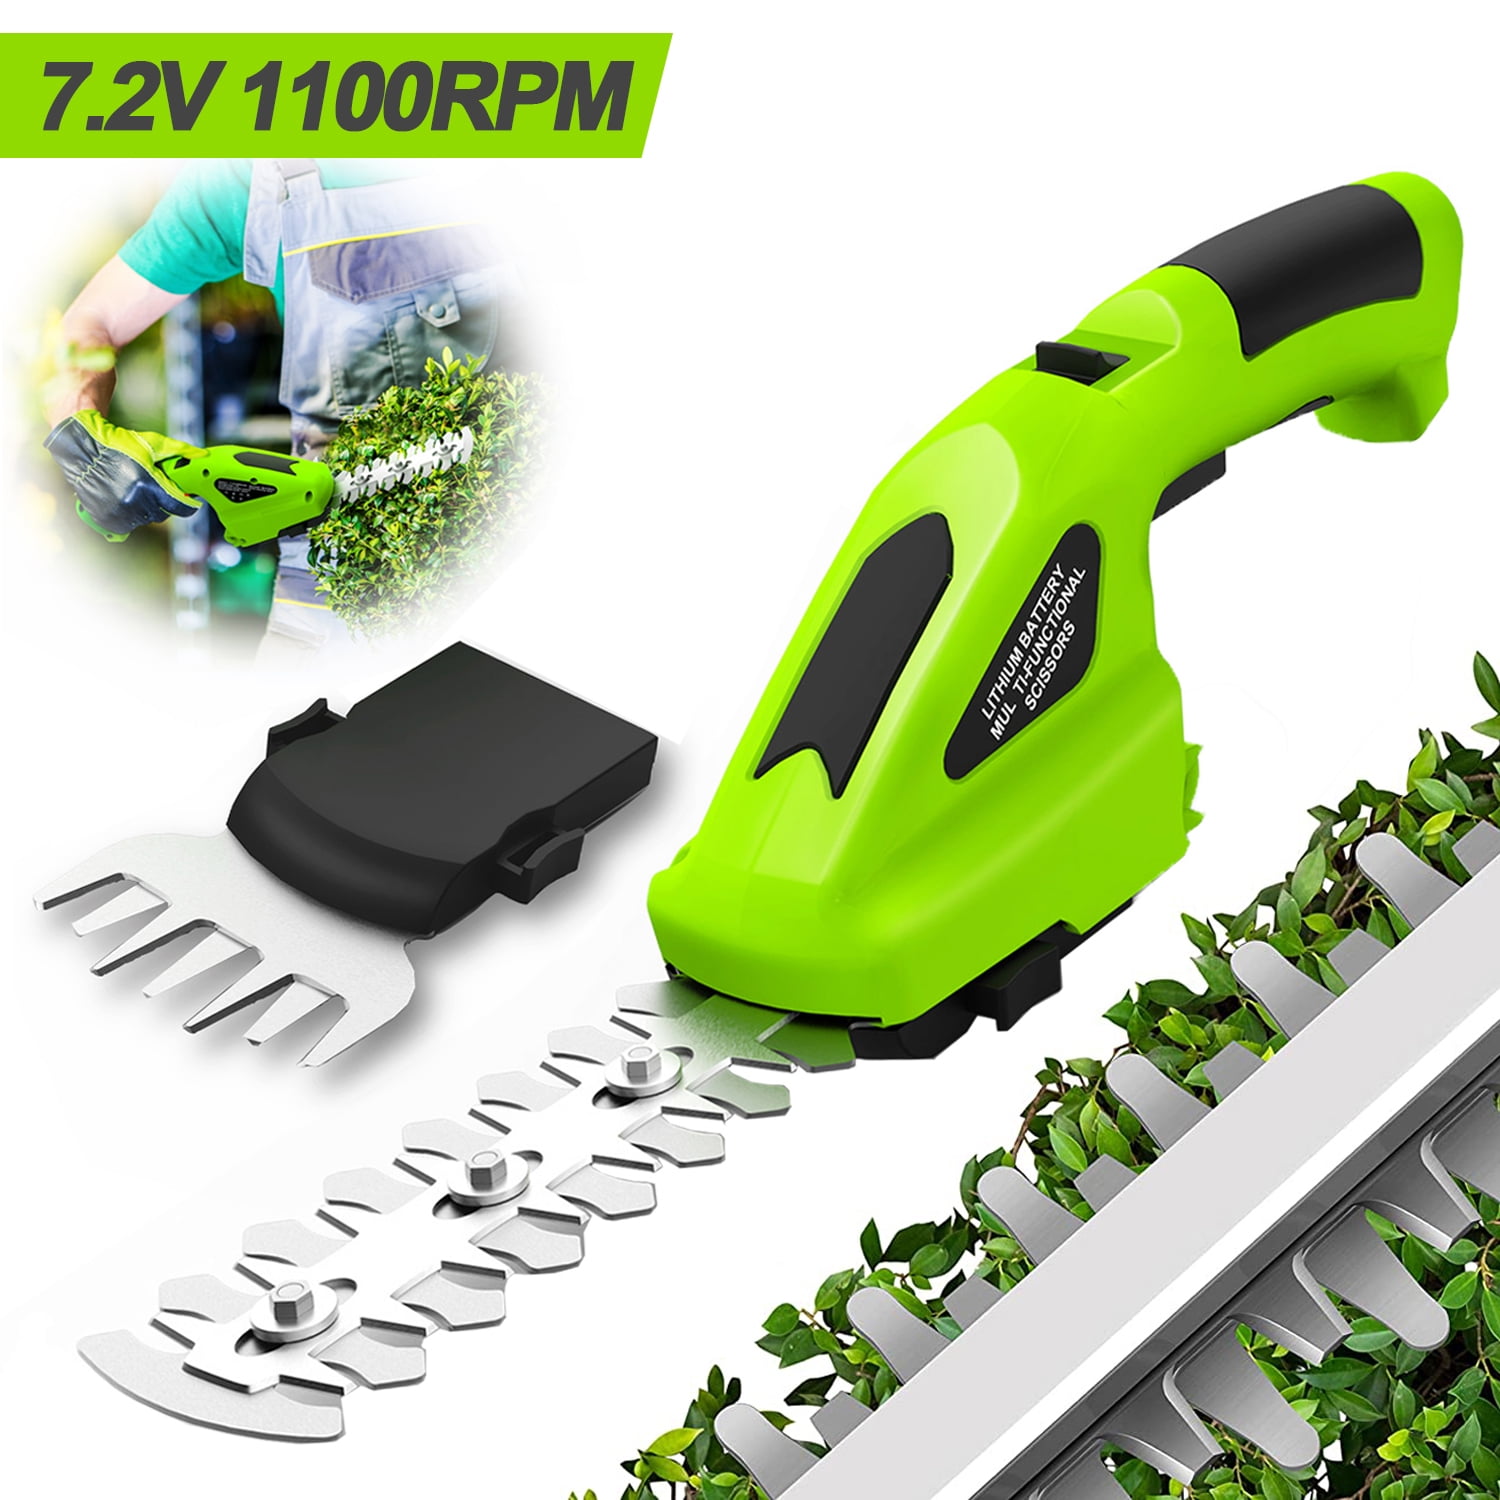 EVEAGE 12 in. Light-Duty Cordless Grass Shears Handheld Grass Hedge Shears 2 in 1 Grass Clippers Shrub Bush Trimmer for Garden